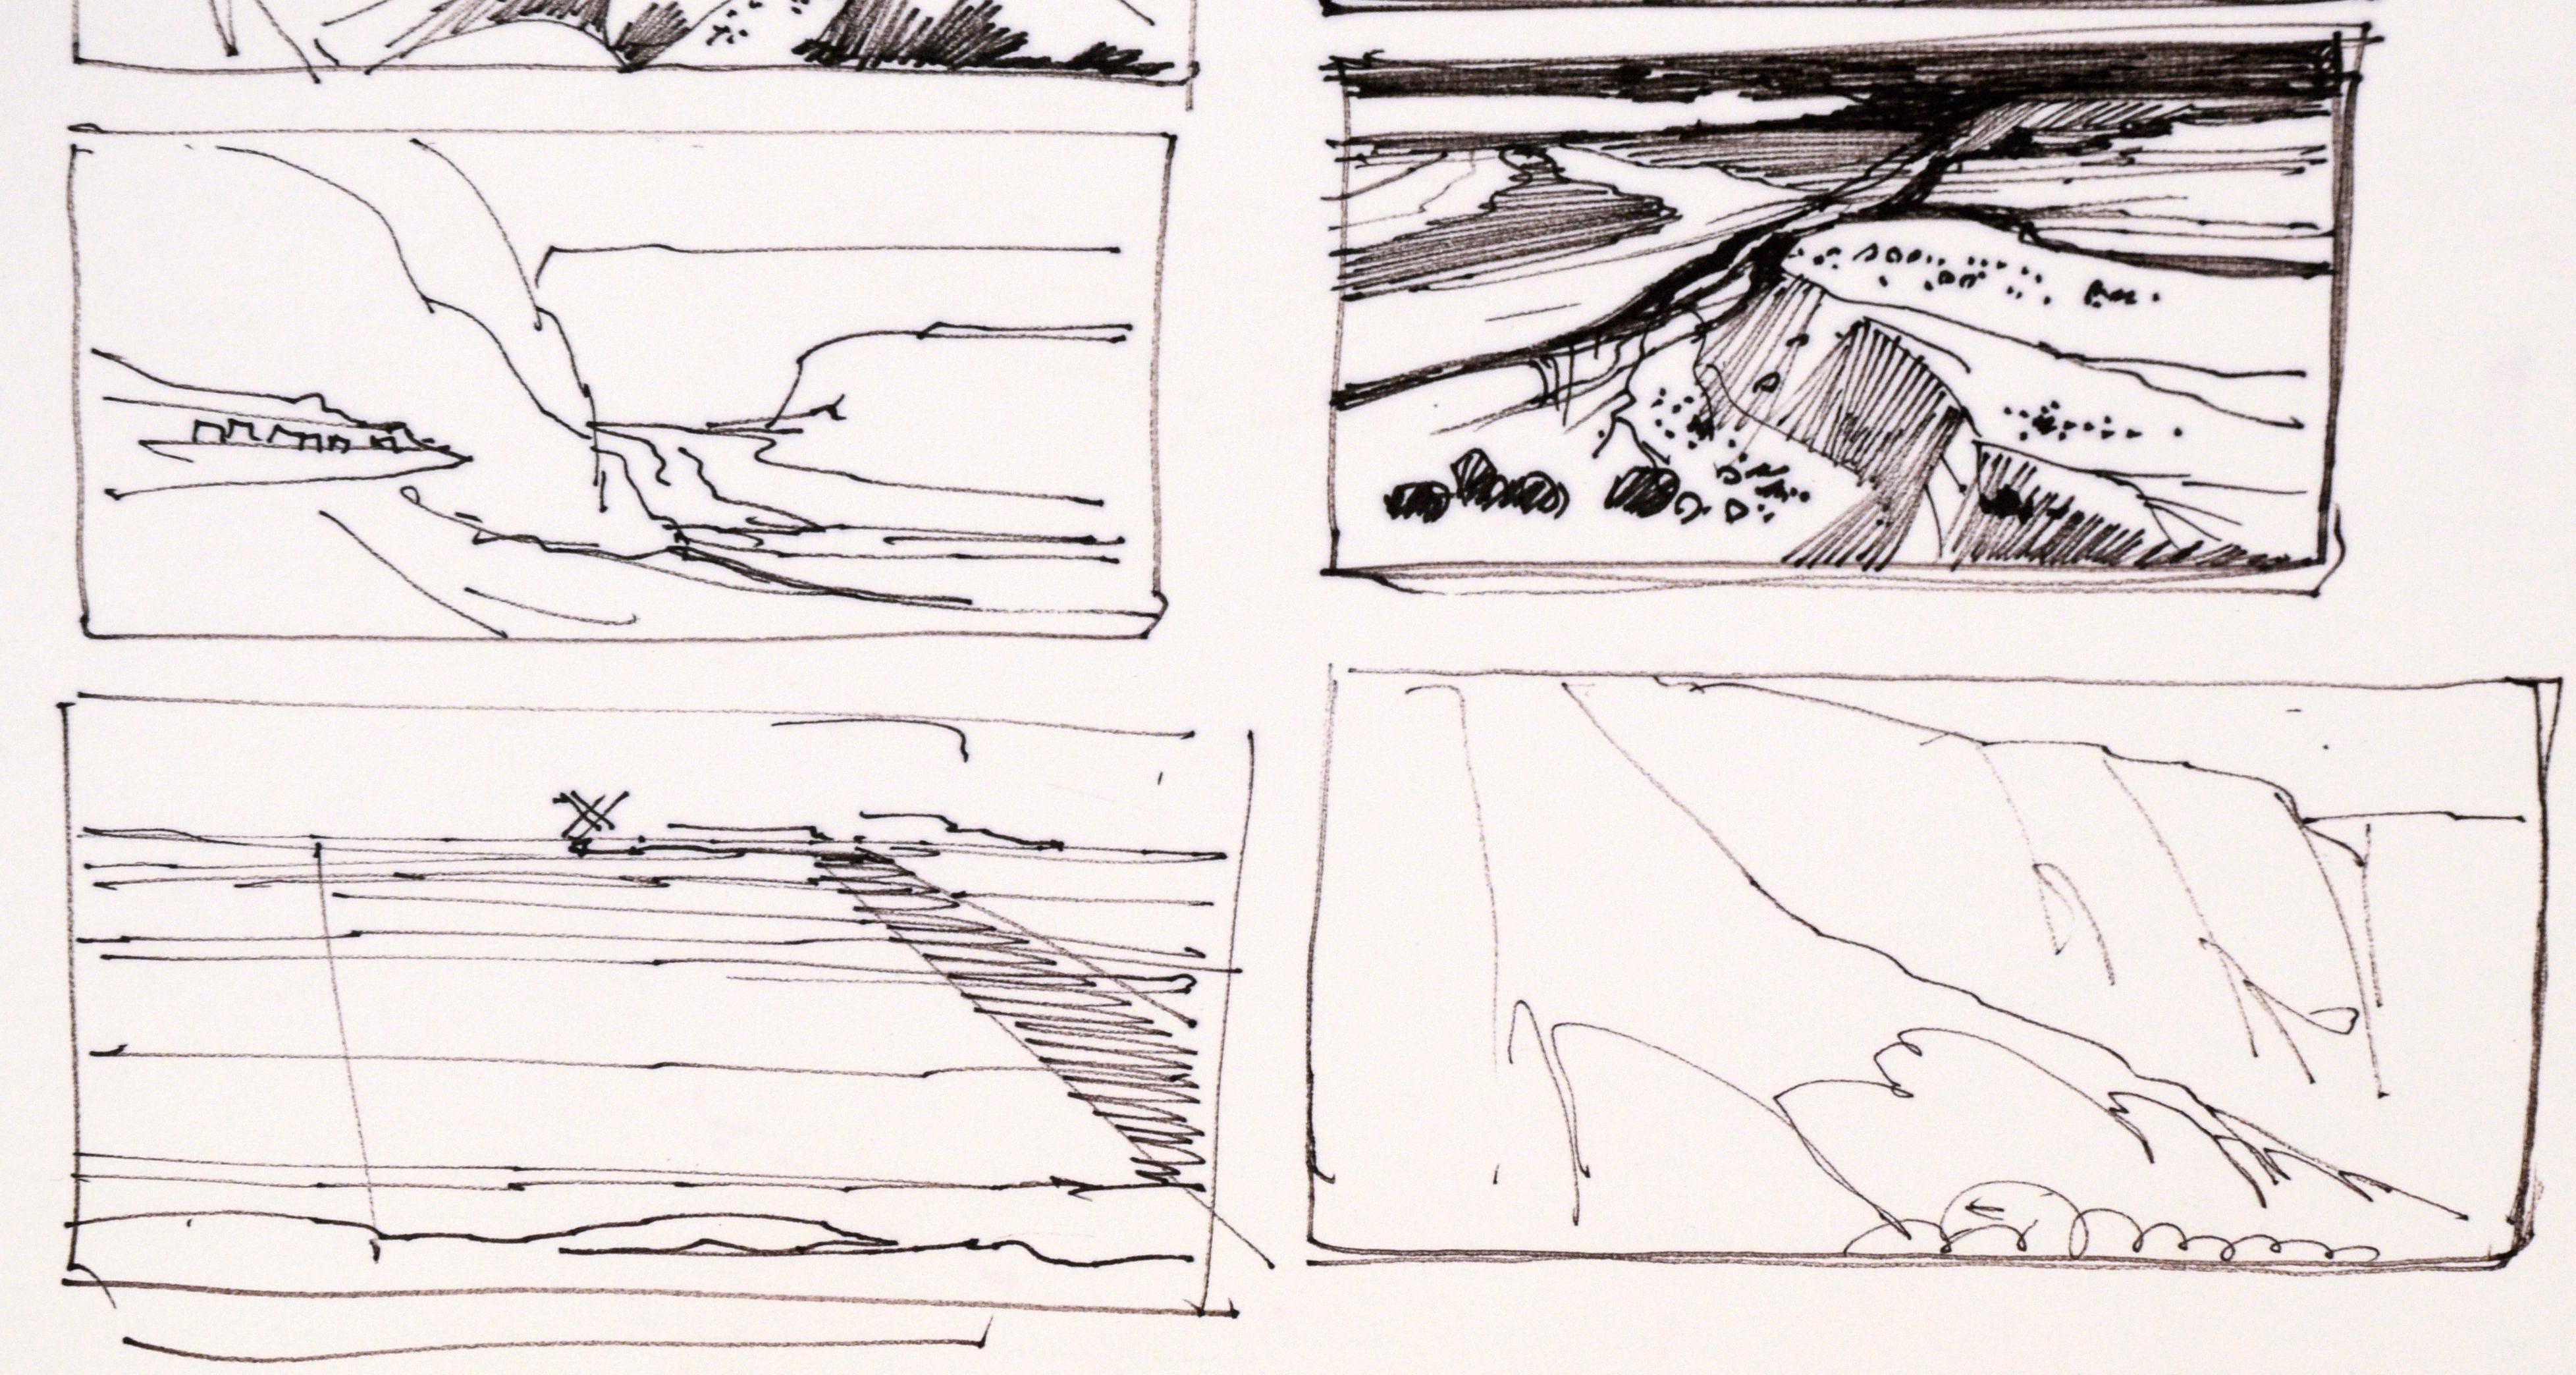 Fifteen-Panel Thumbnail Sketches of Desert and Canyon Landscapes in Ink on Paper

Collection of landscape line drawings by listed Maine artist Laurence Sisson (American, 1928-2015). Fifteen panels of preparatory drawings for landscape paintings are